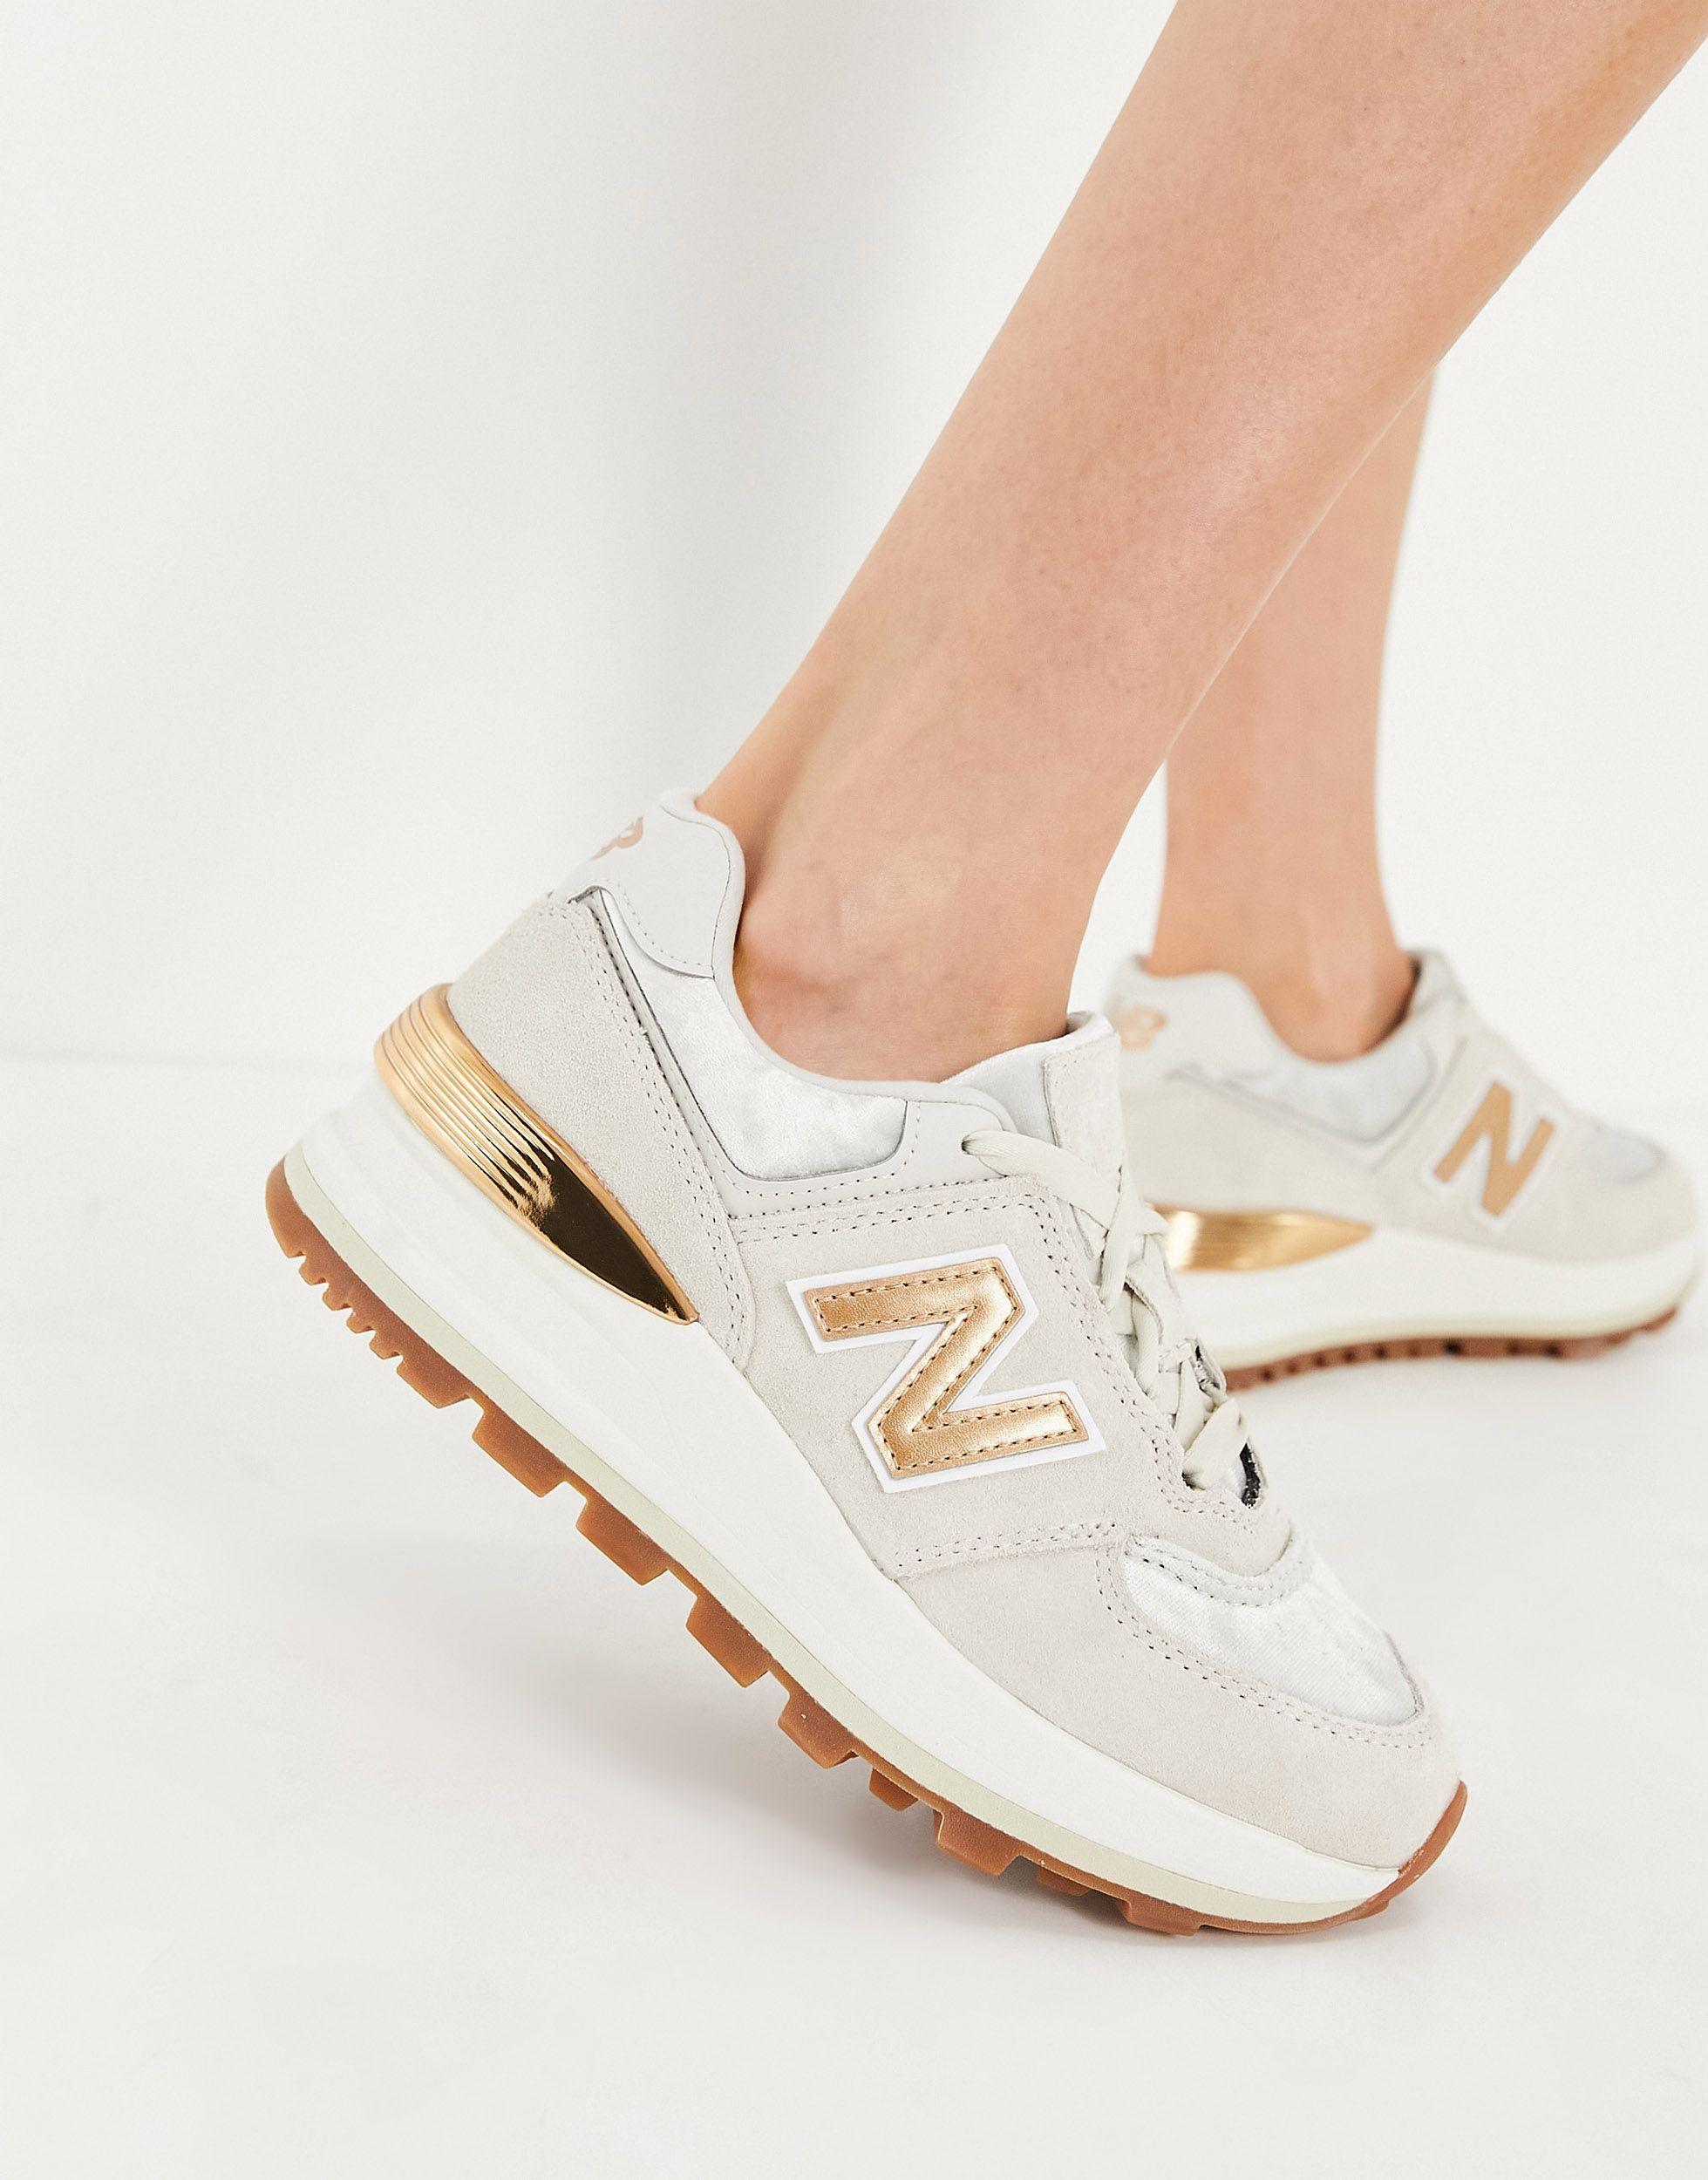 New Balance 574 Wedge Trainers in White | Lyst UK